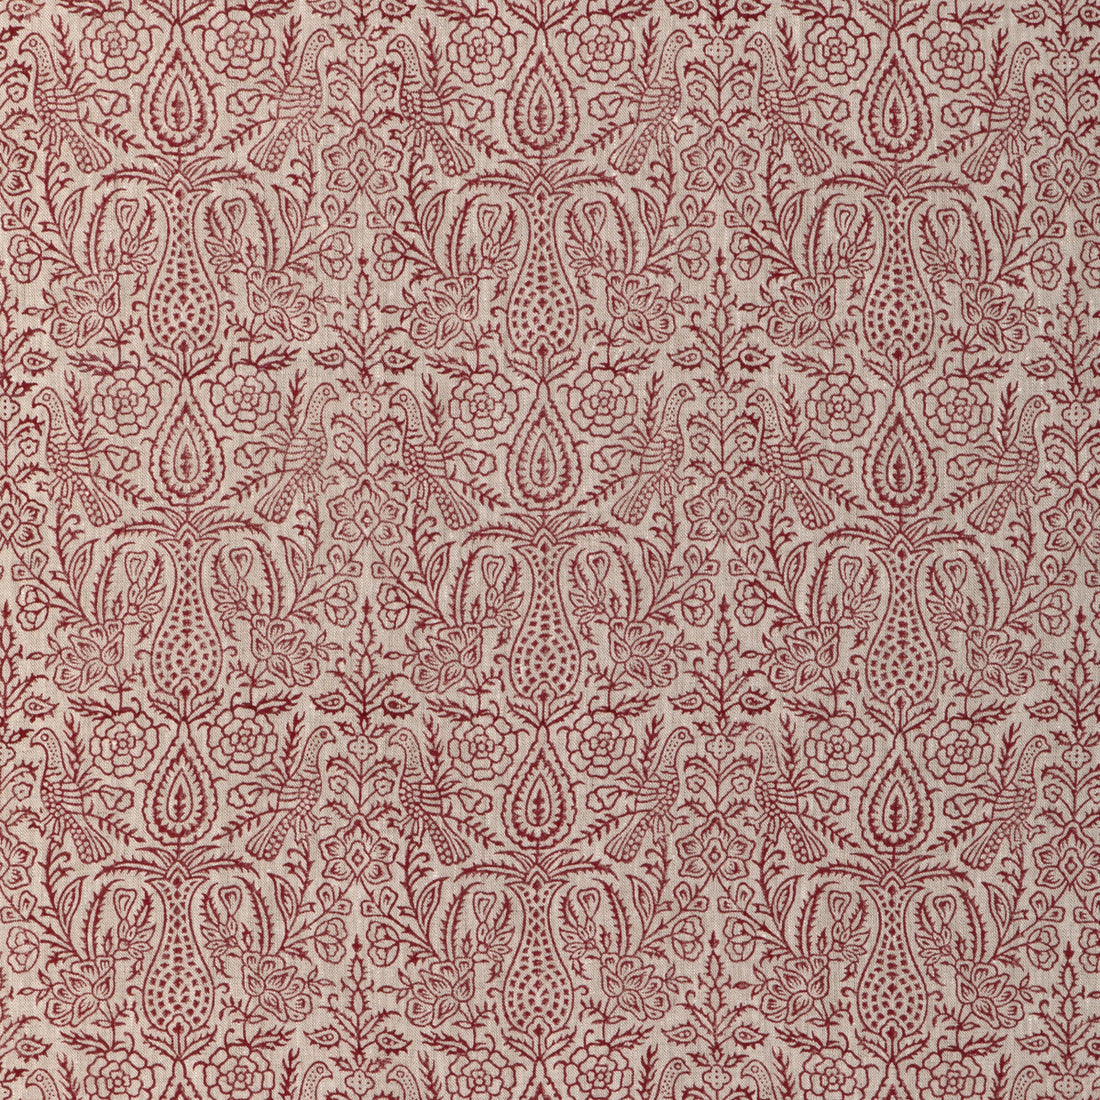 Haven Handblock fabric in ruby color - pattern 2023101.19.0 - by Lee Jofa in the Clare Prints collection